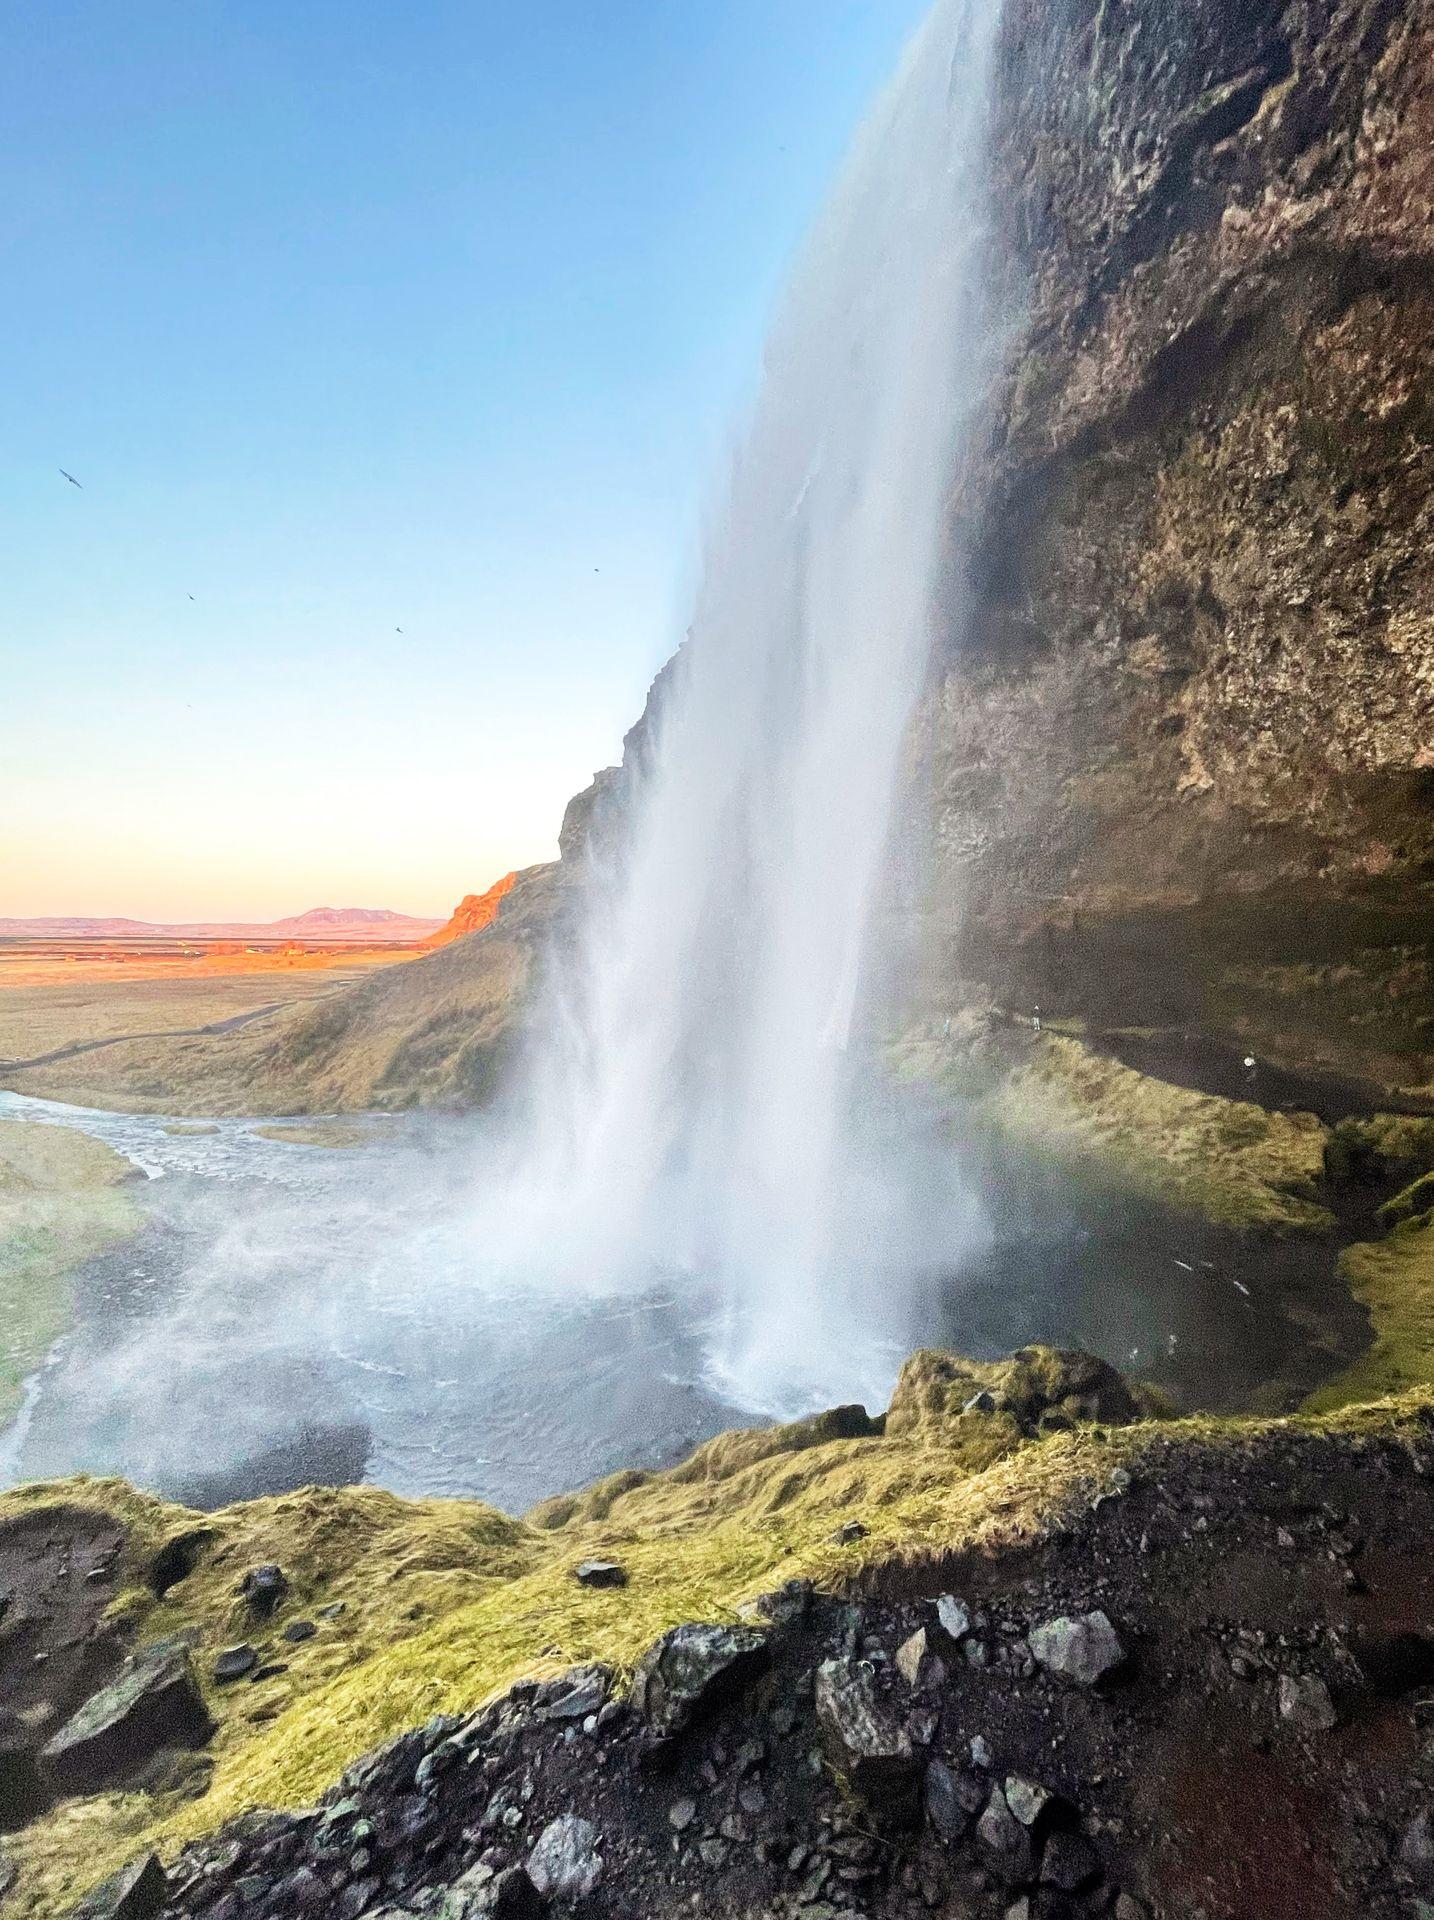 Looking at the side of Seljalandsfoss. The mountains in the distance are glowing orange with the setting sun.